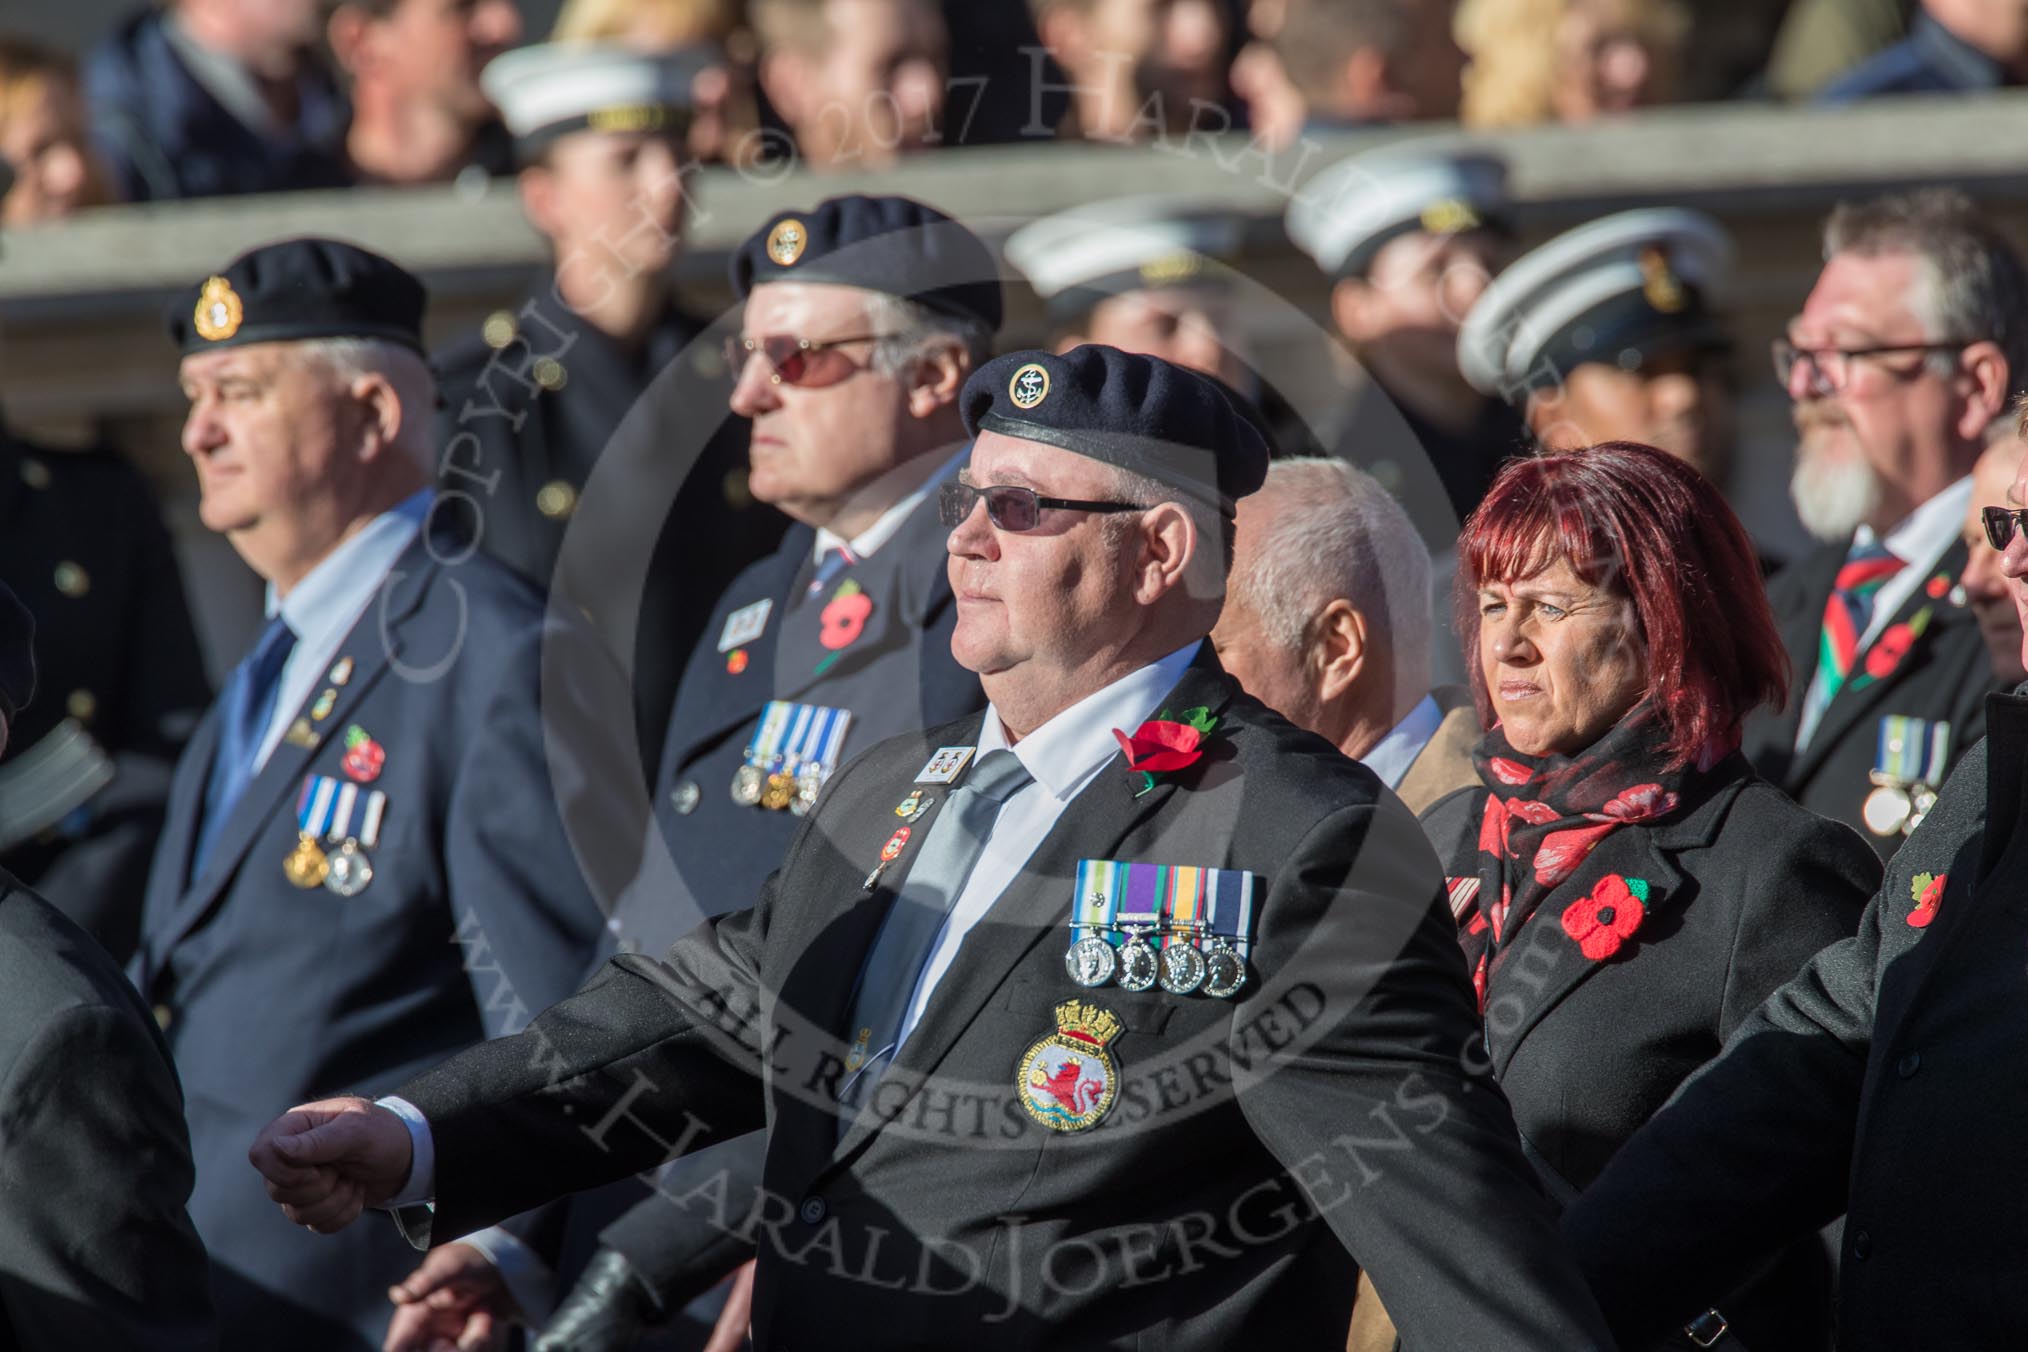 HMS Glasgow Association  (Group E29, 29 members) during the Royal British Legion March Past on Remembrance Sunday at the Cenotaph, Whitehall, Westminster, London, 11 November 2018, 11:44.